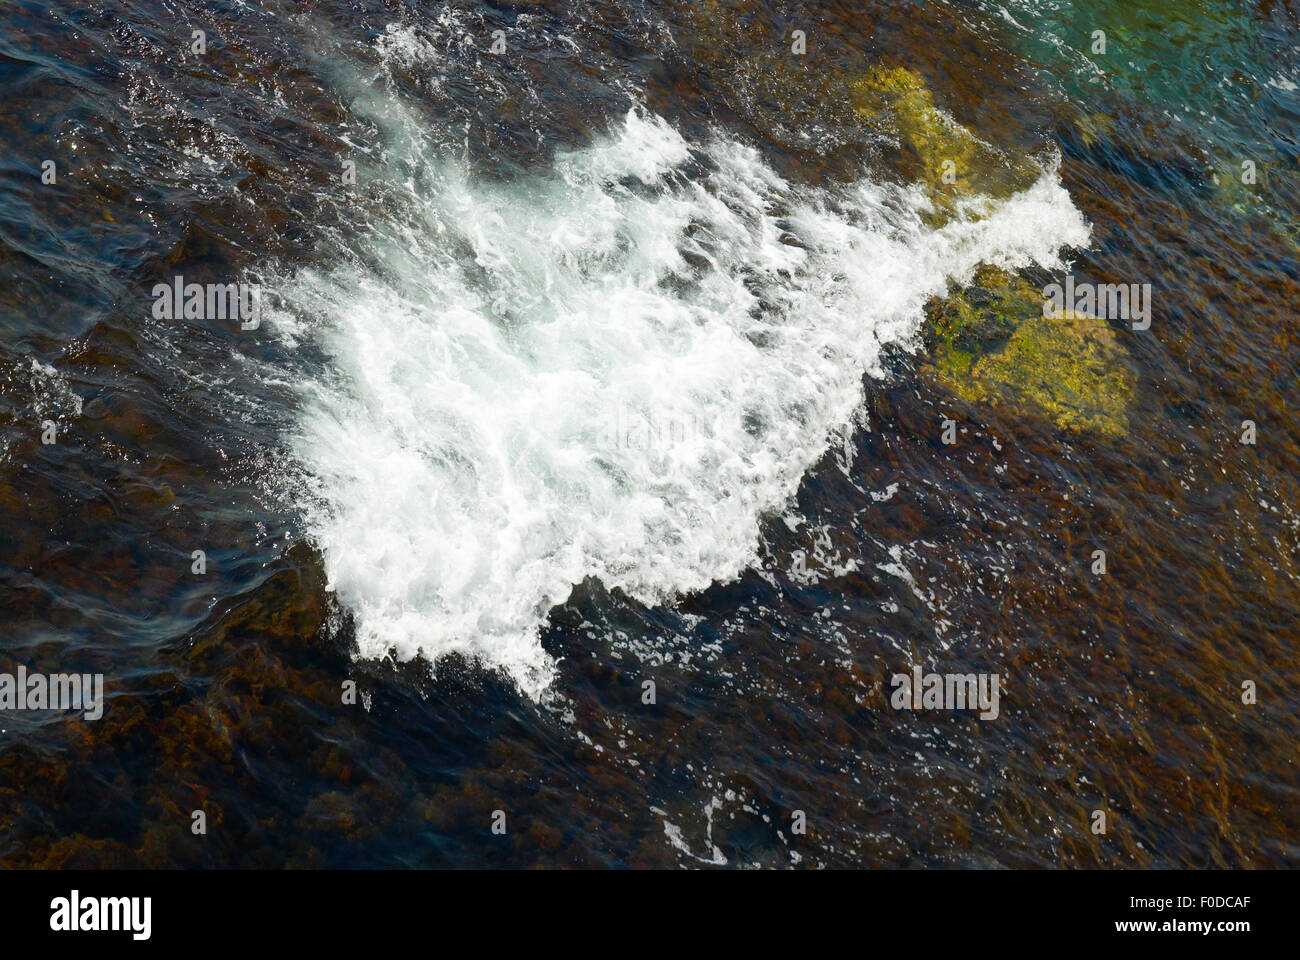 A big wave and the brown algae. Stock Photo